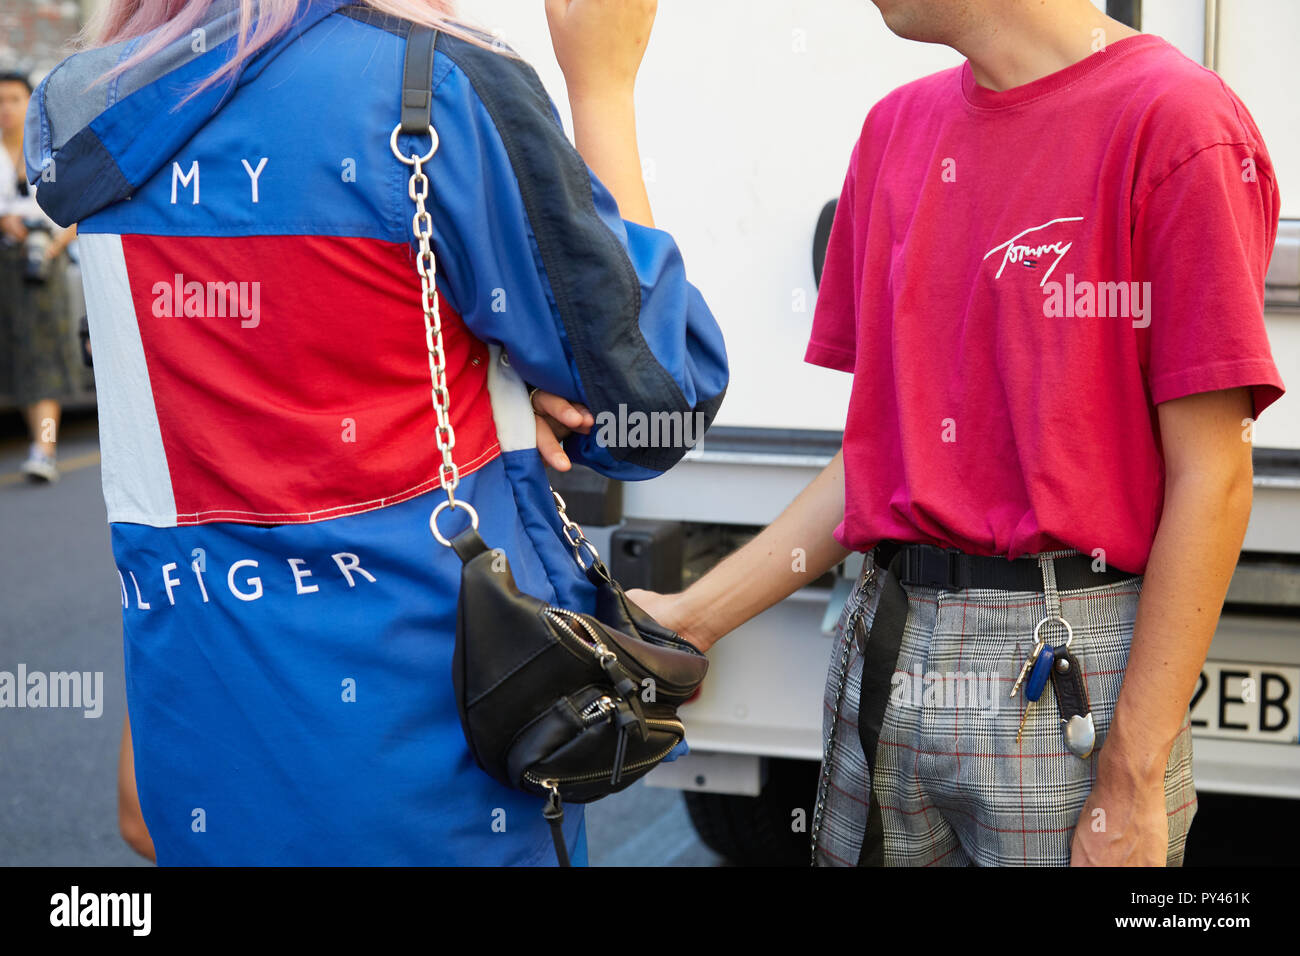 MILAN, ITALY - SEPTEMBER 23, 2018: Woman with blue, red and white Tommy Hilfiger jacket and man with pink shirt before Fila fashion show, Milan Fashio Stock Photo